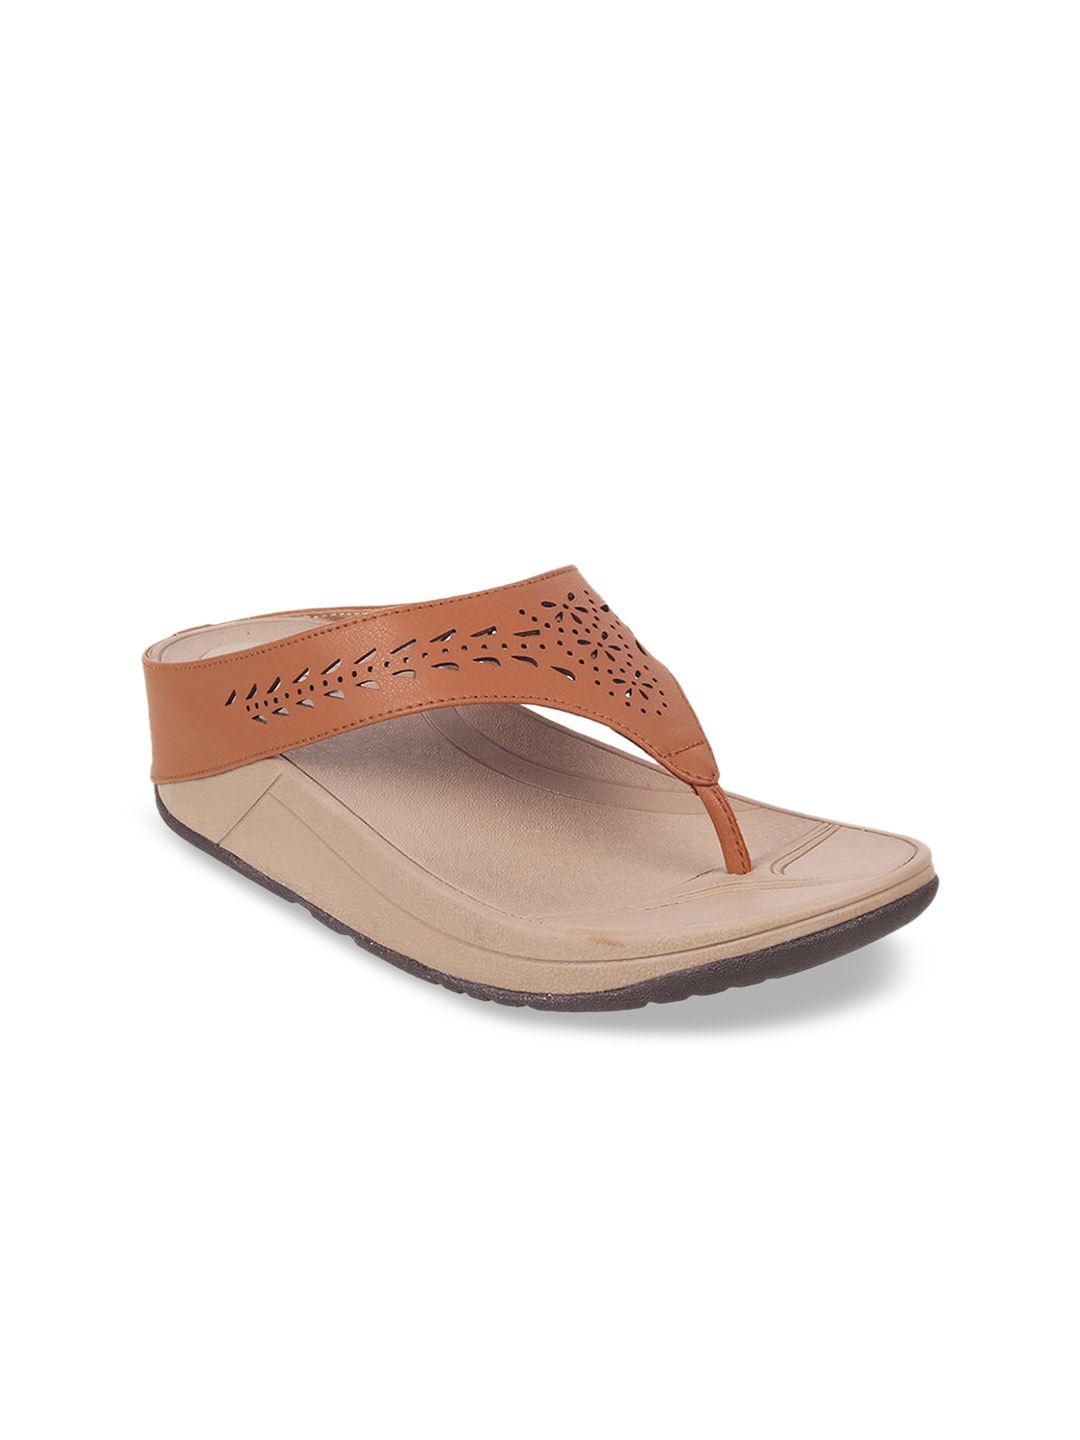 Mochi Women Open Toe Flats with Laser Cuts Price in India